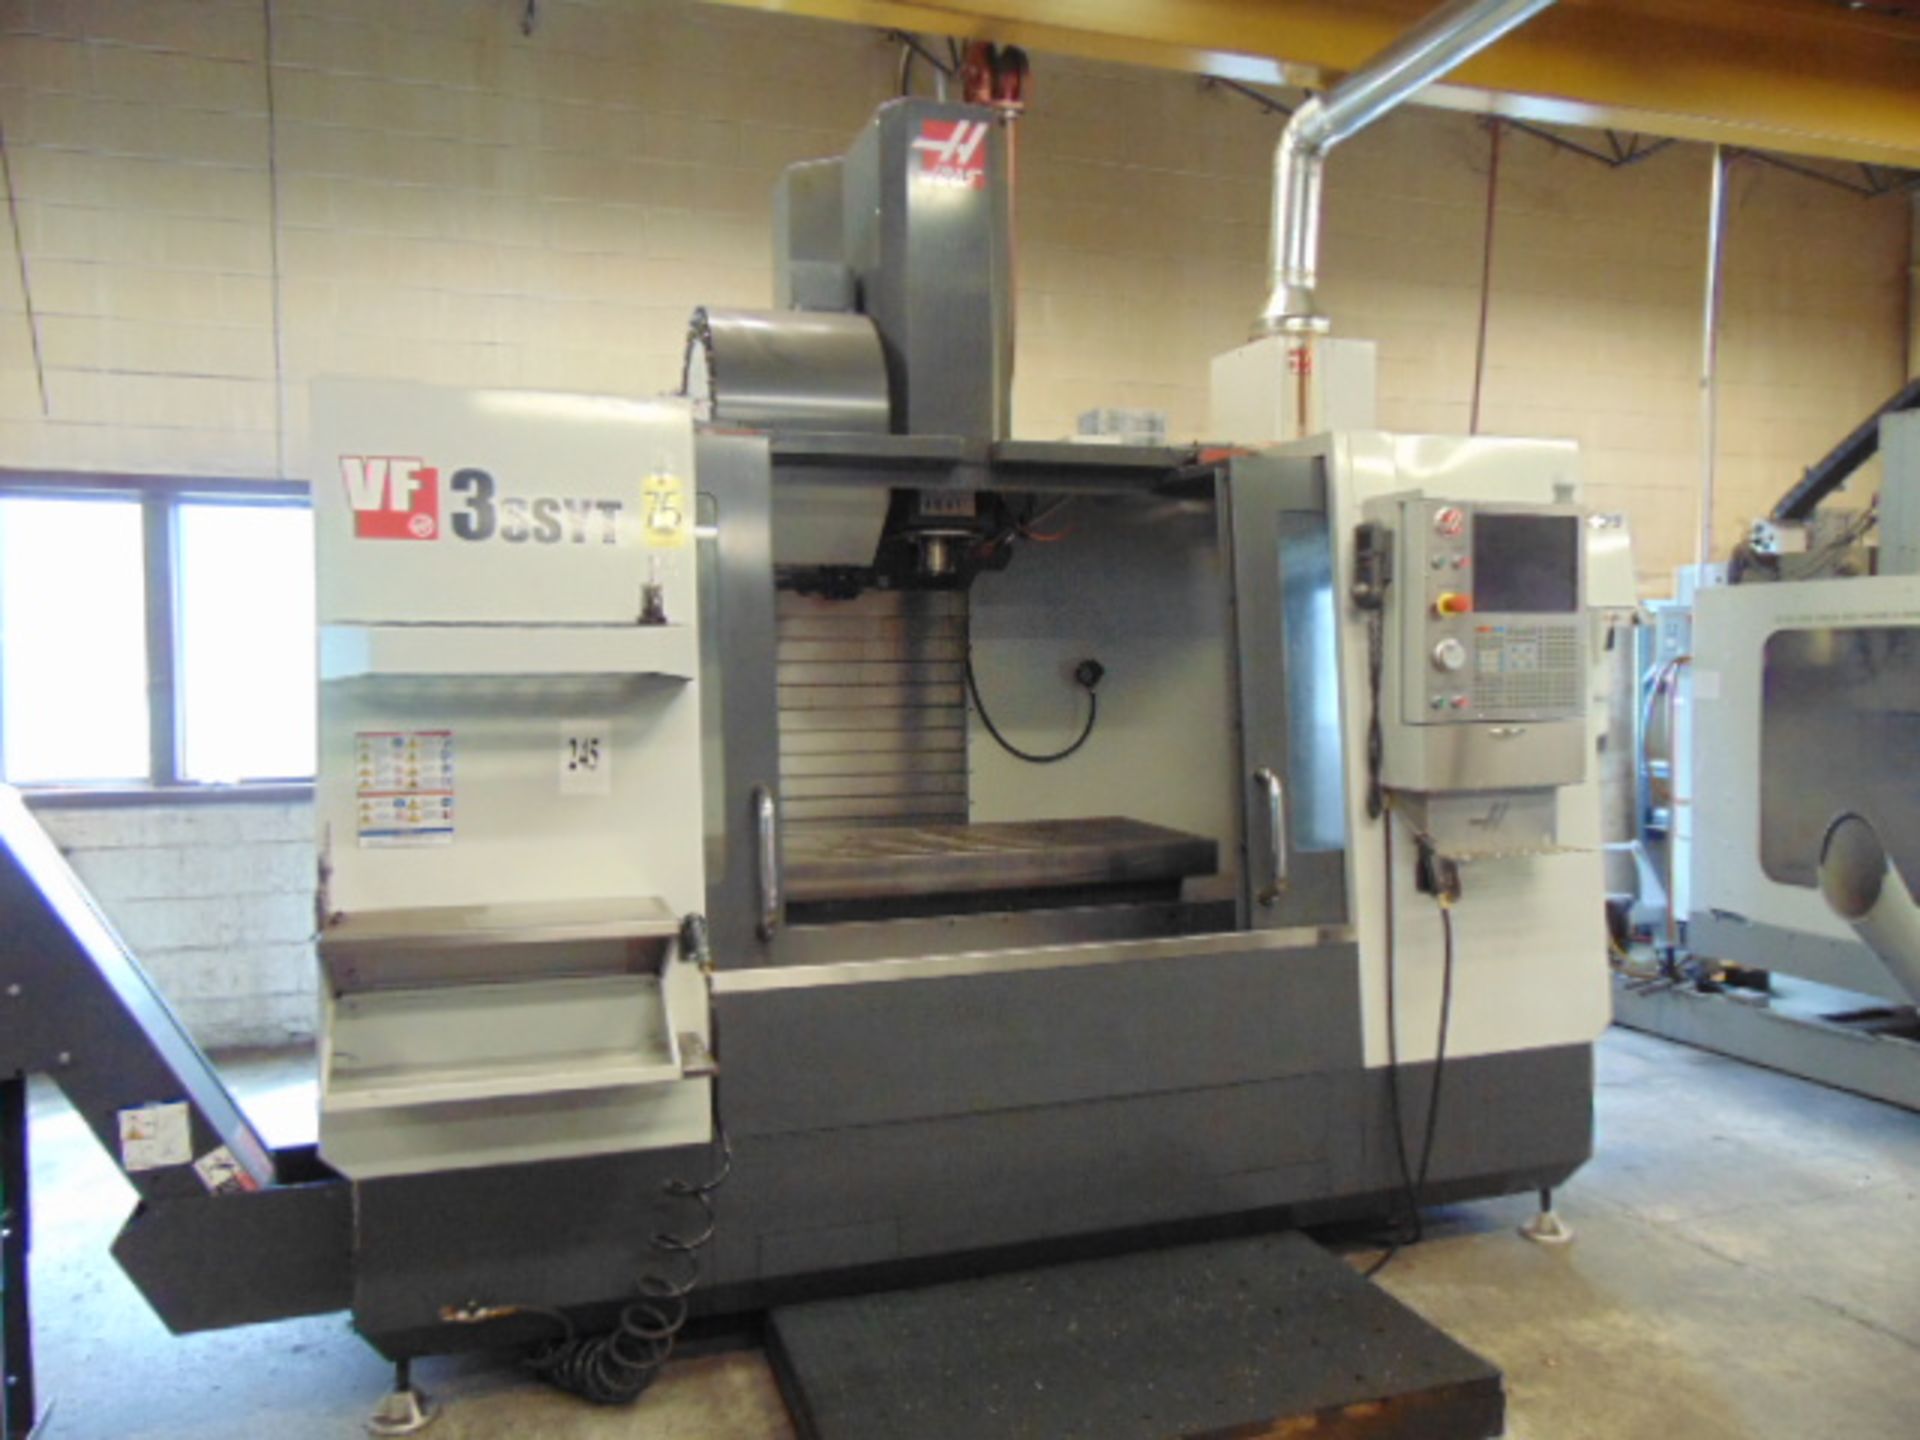 VERTICAL MACHINING CENTER, HAAS MDL. VF3SSYT, new 1/2016, 54” X 24” table, 1,750 lb. load, 40” X,